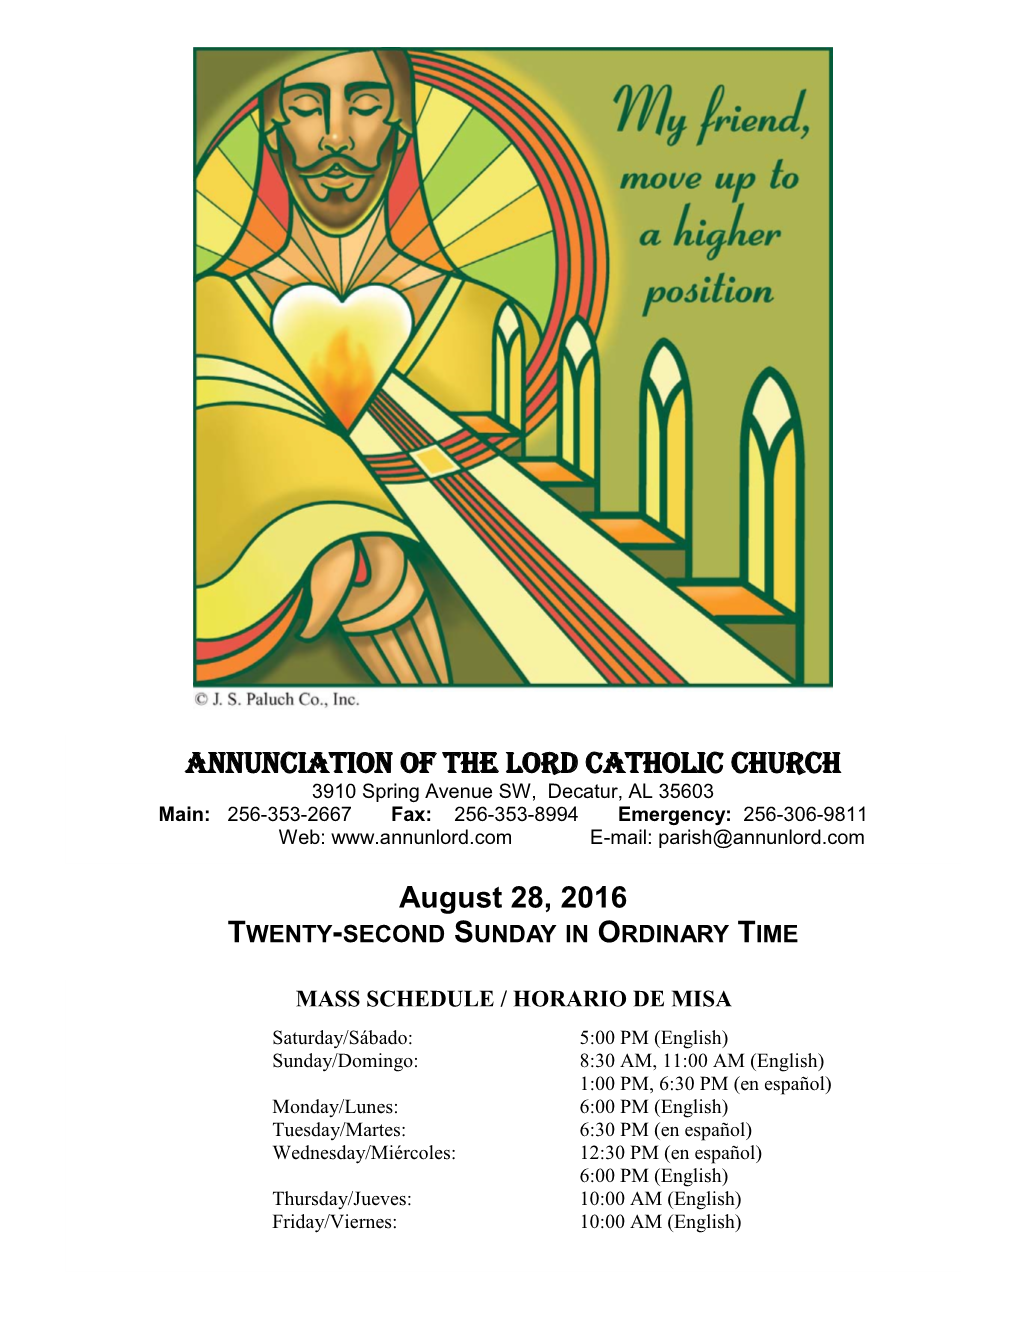 ANNUNCIATION of the LORD CATHOLIC CHURCH August 28, 2016